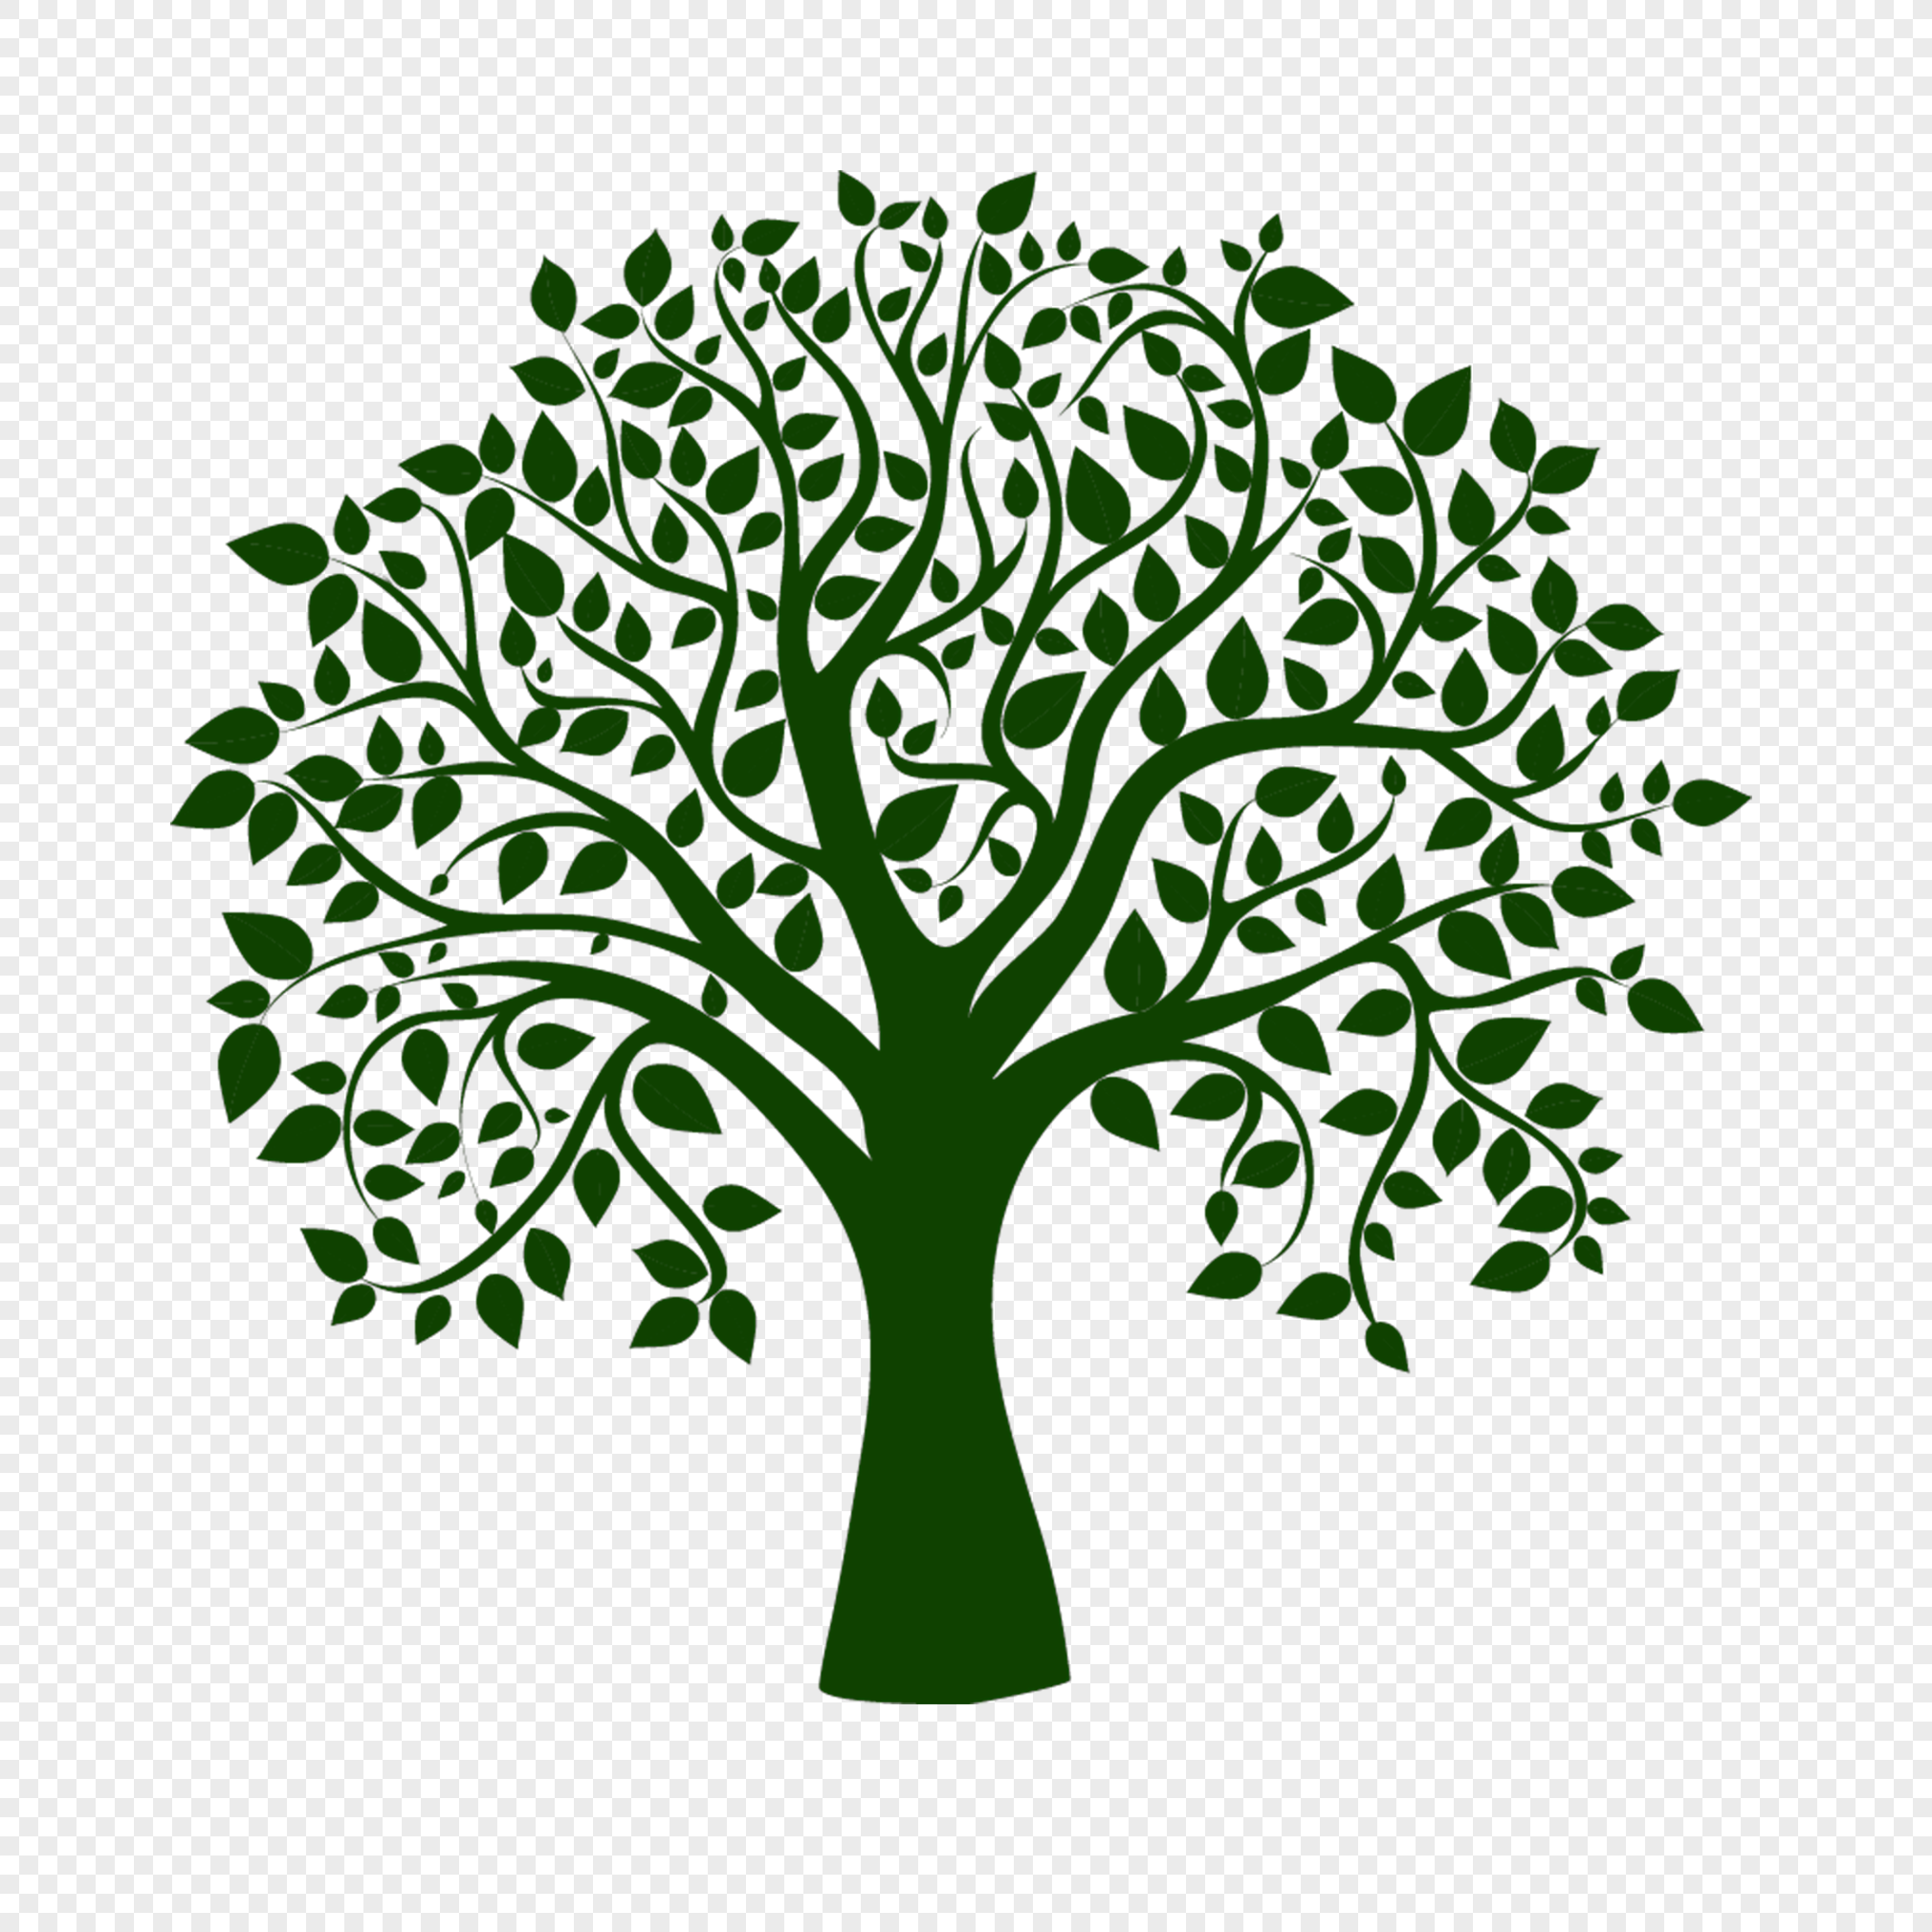 Green trees silhouette elements, tree, simple tree, green posters png picture